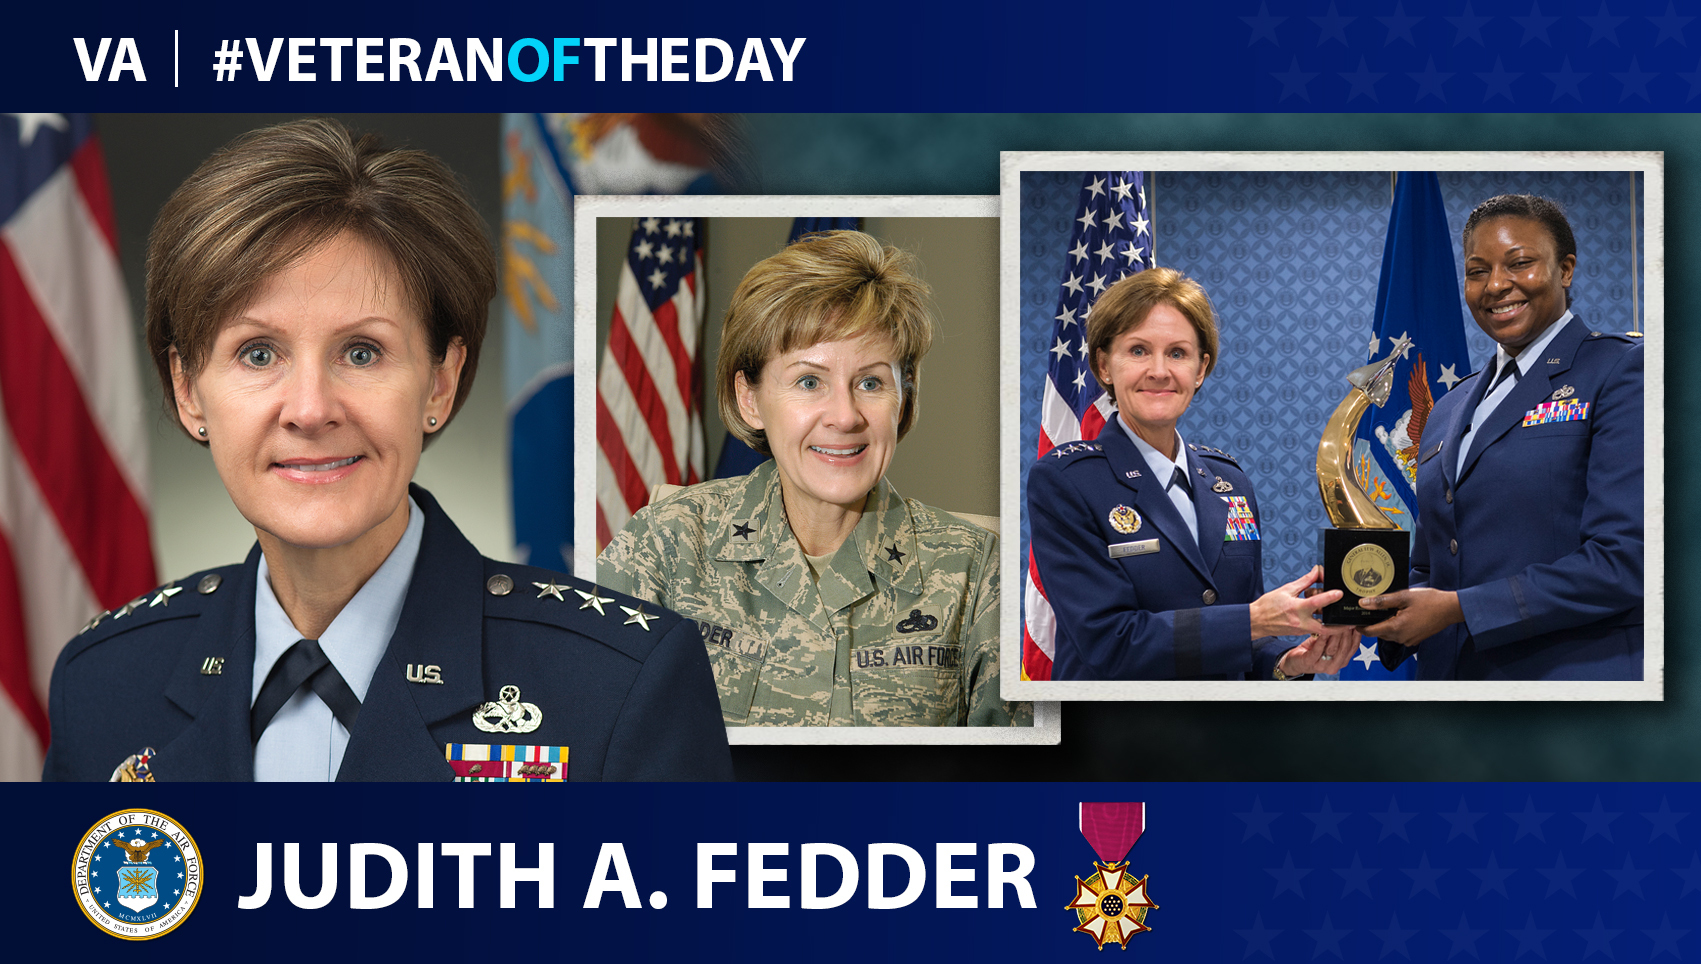 Air Force Veteran Judith Fedder is today’s Veteran of the Day.